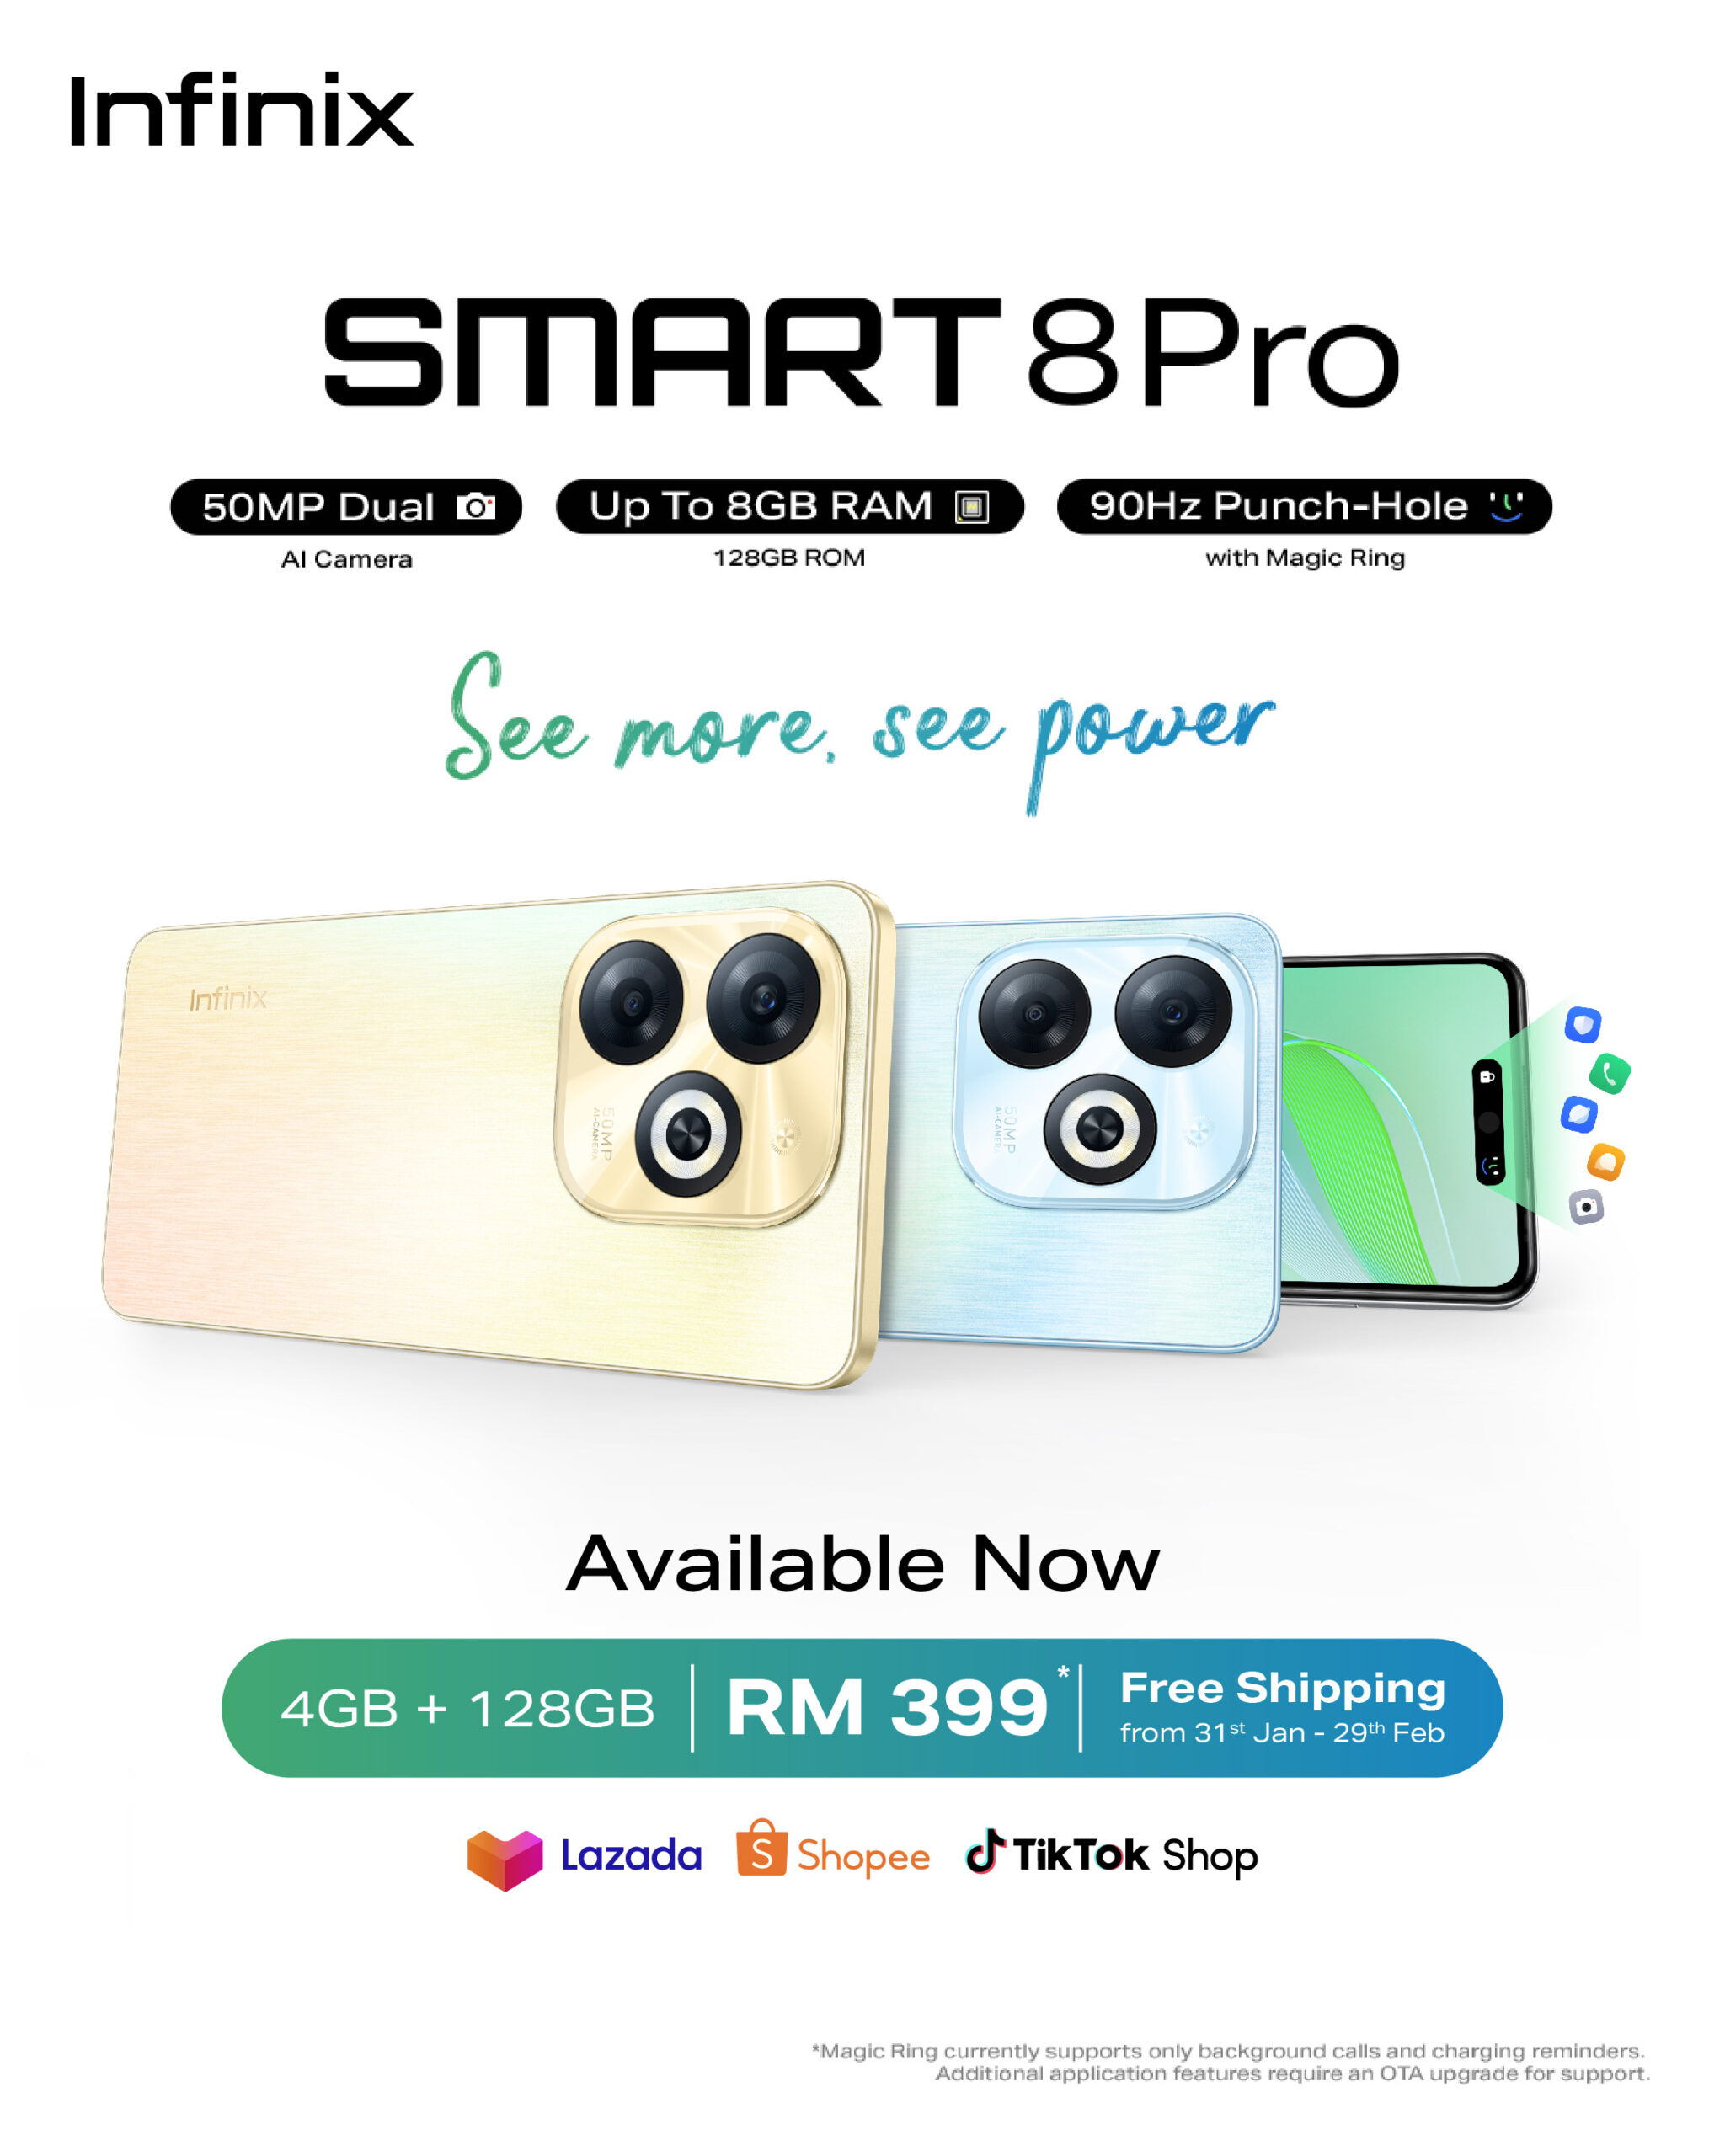 INFINIX SMART 8 PRO FIRST SALE scaled 1